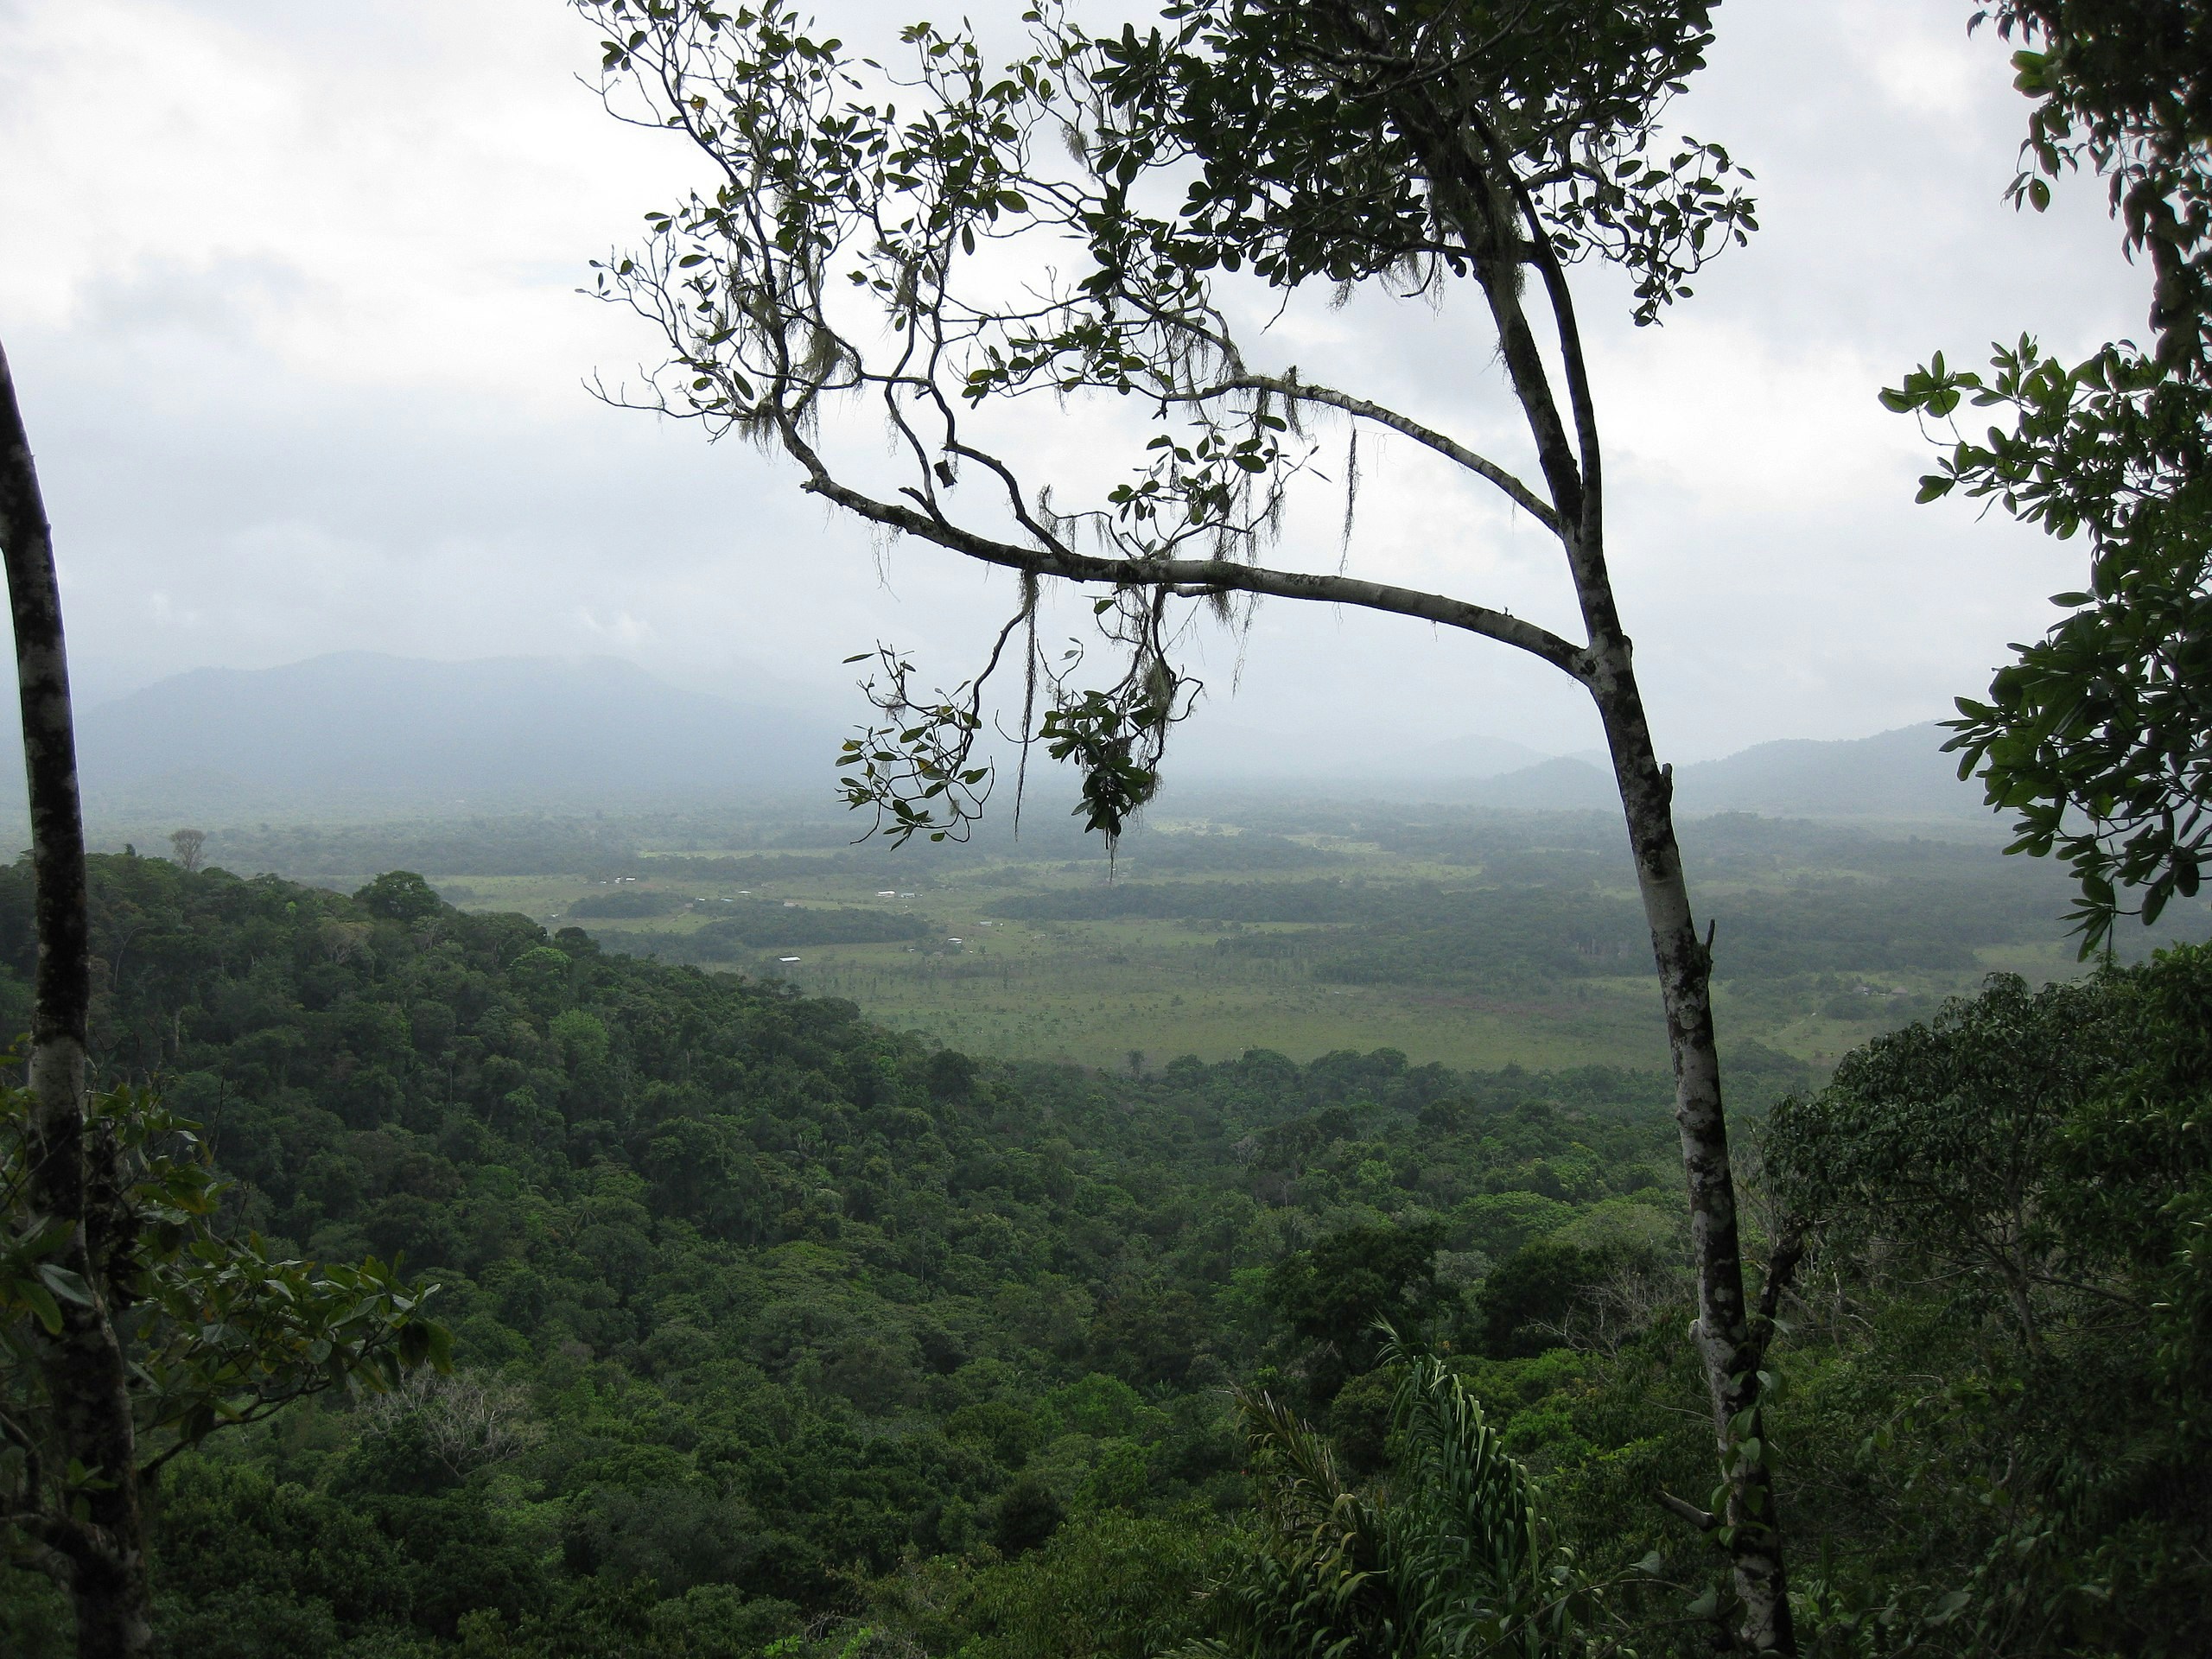 Is there a case for “high forest, low deforestation” carbon credits?